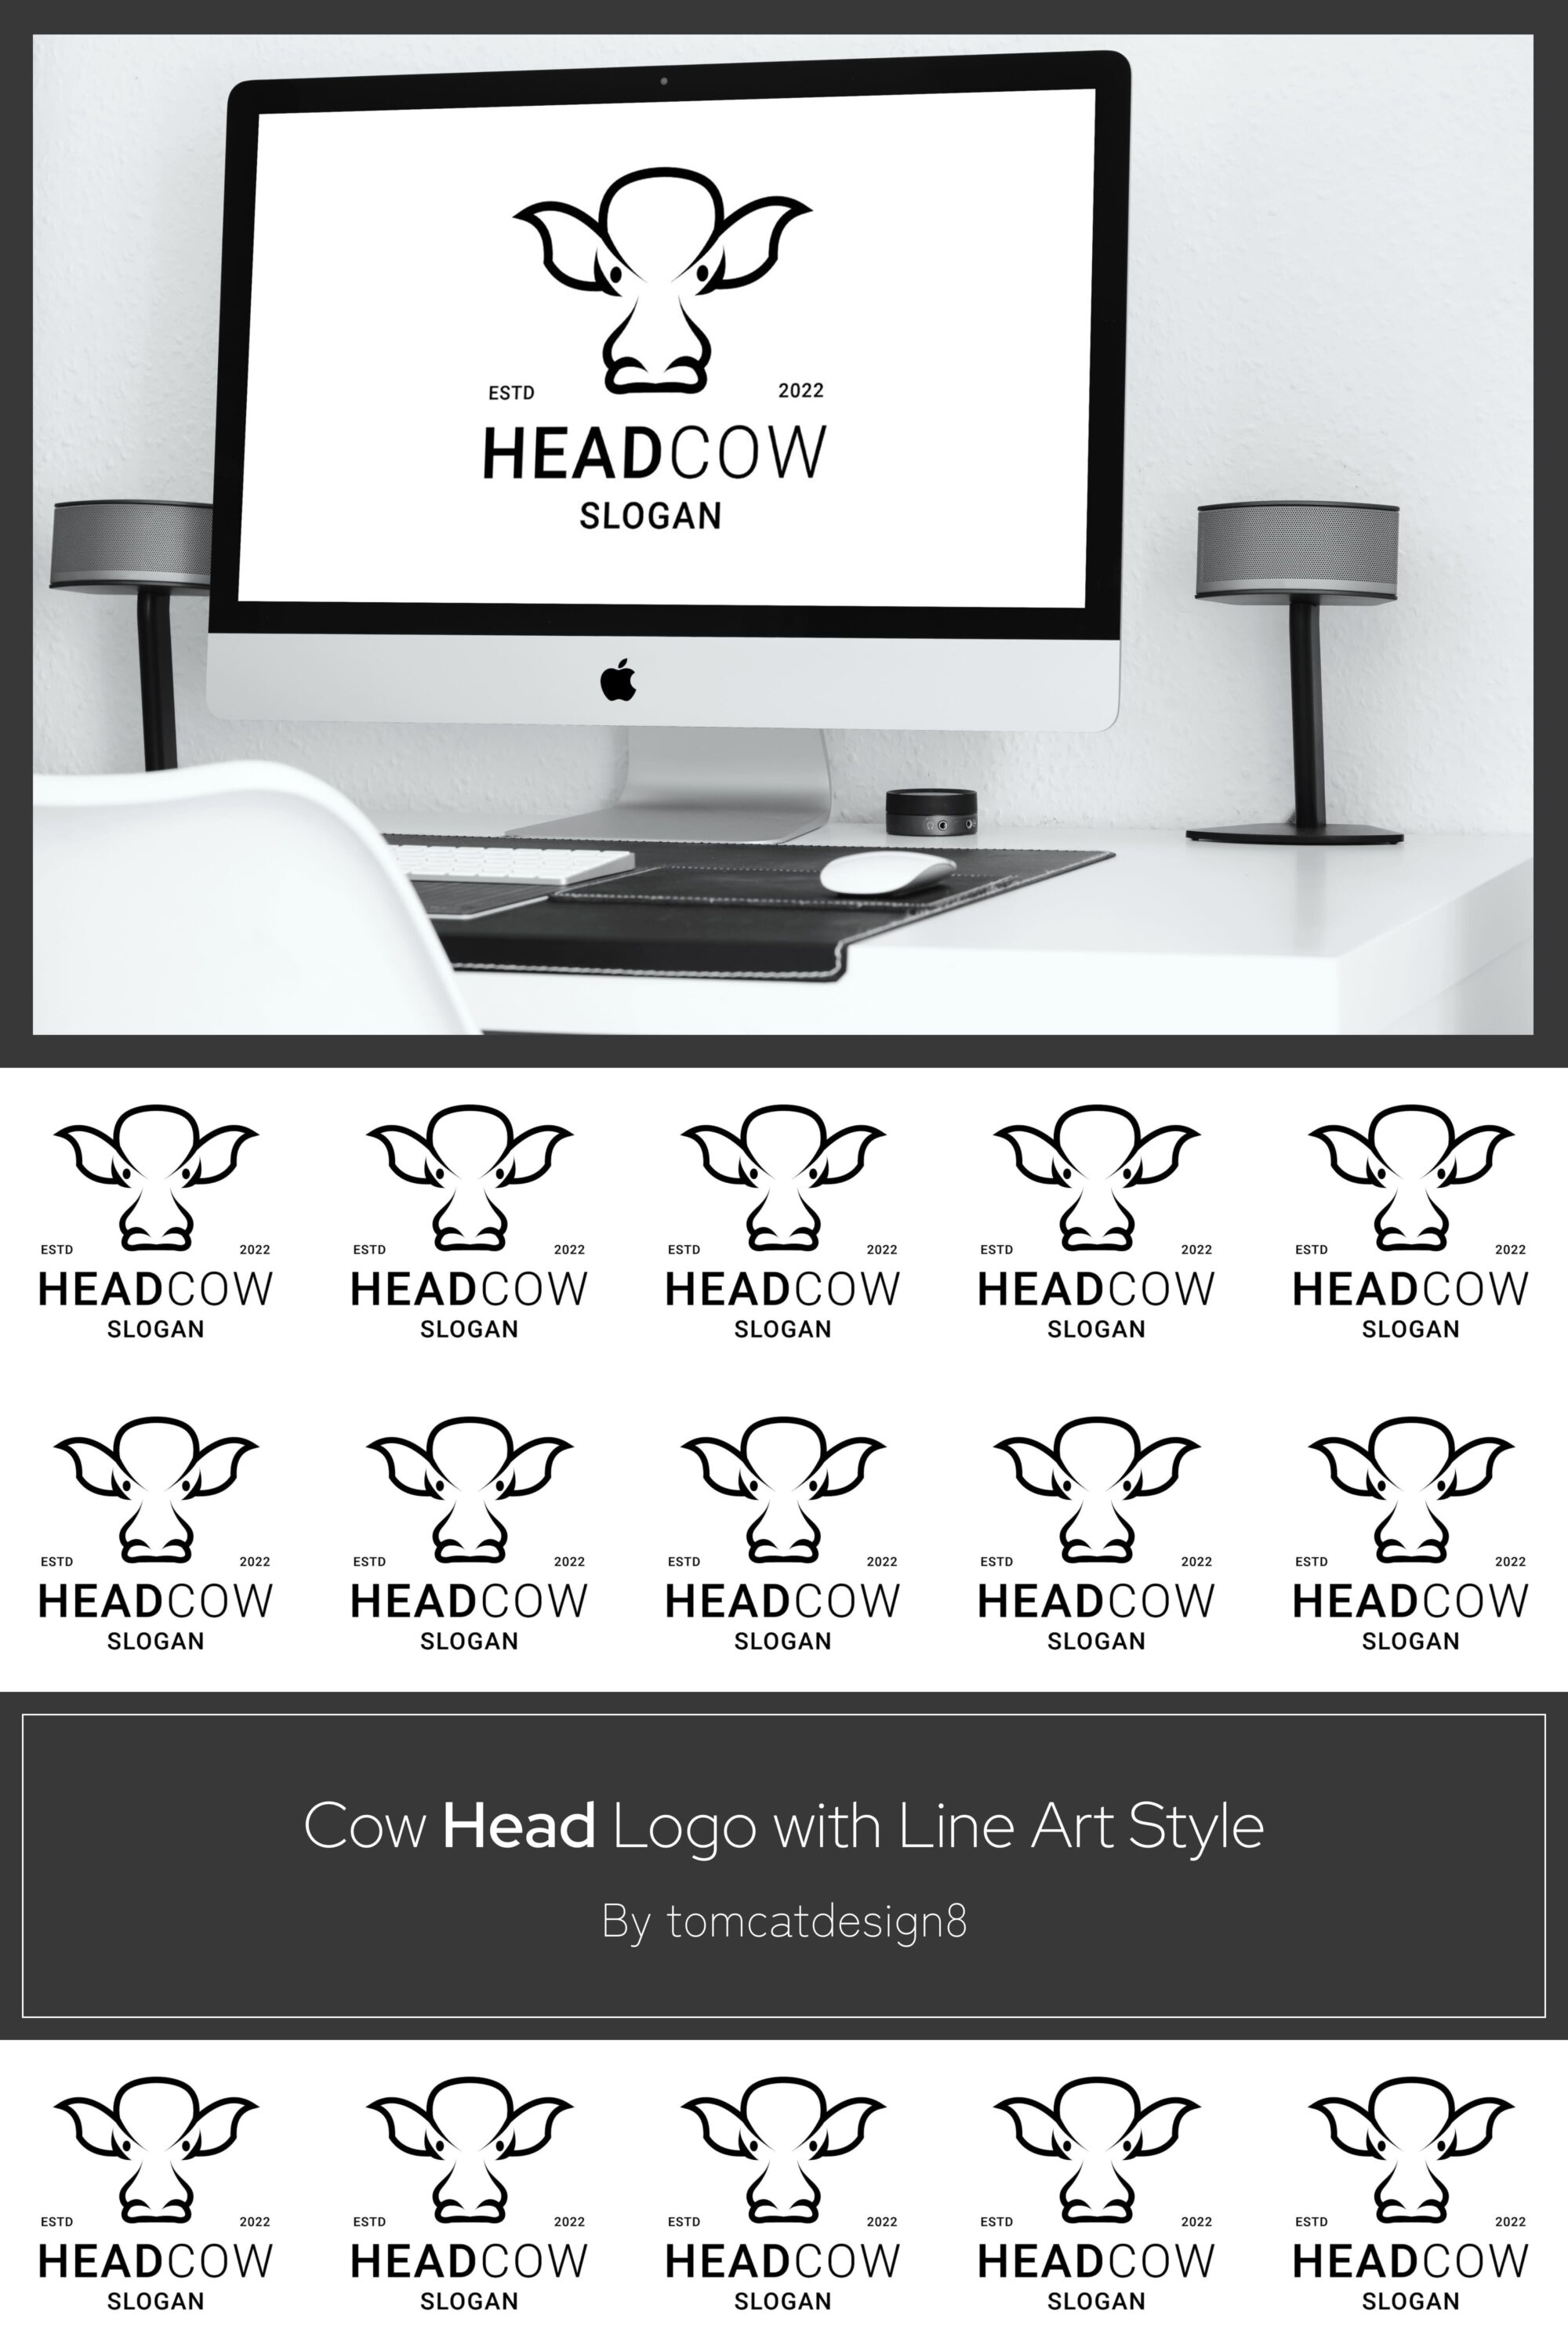 cow head logo with line art style 03 470